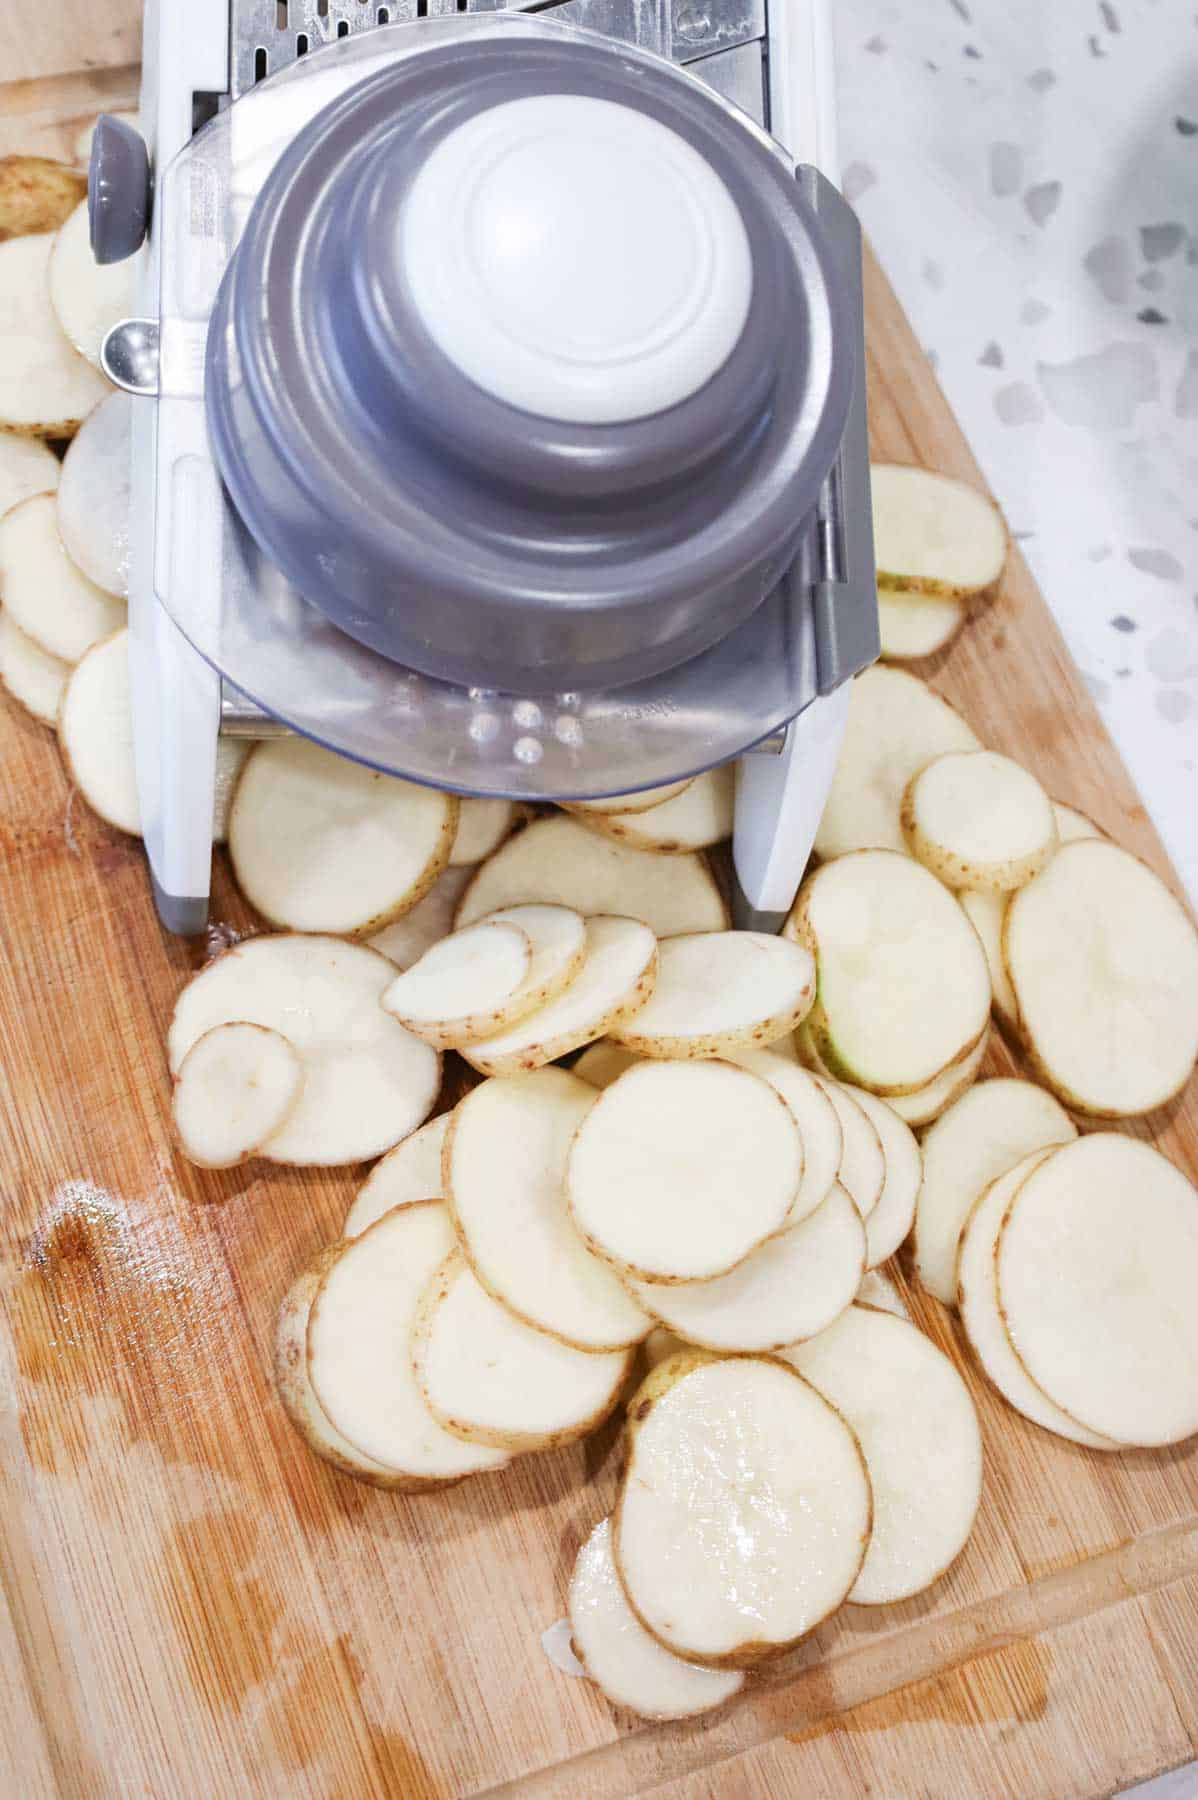 mandoline slicer and sliced potatoes on a cutting board